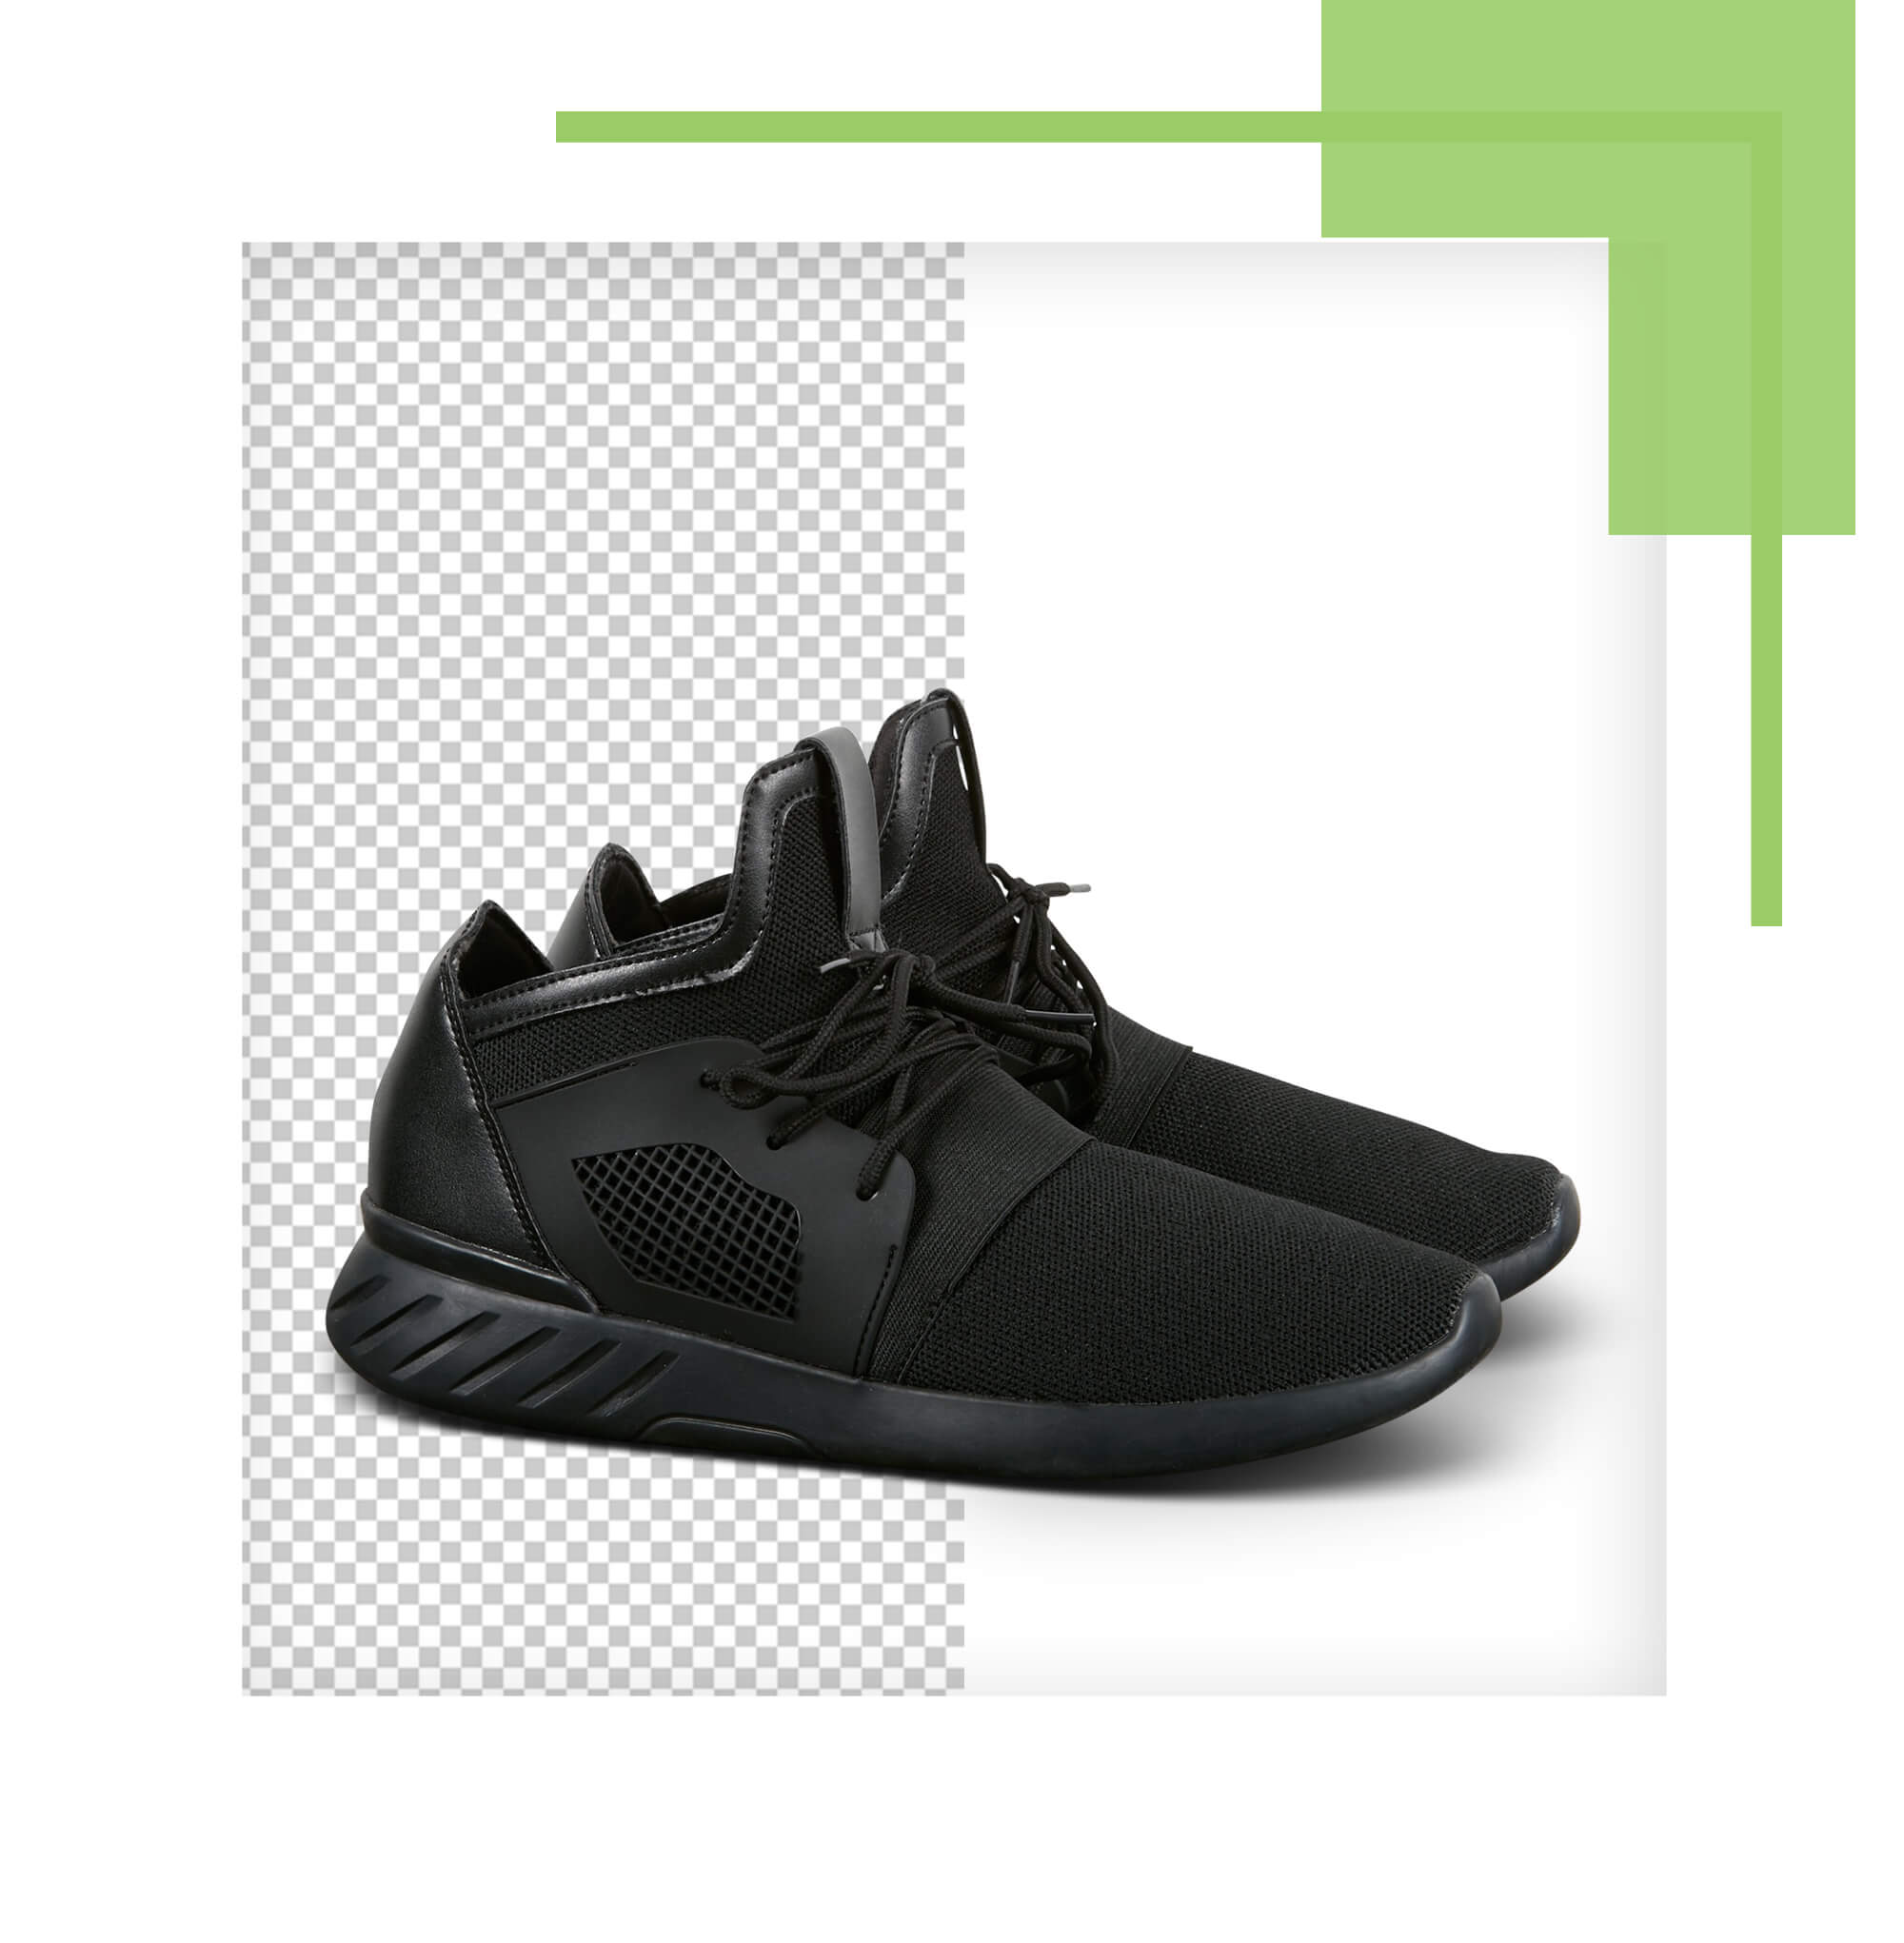 Clipping Paths World Image Background removal service before-after example for shoe